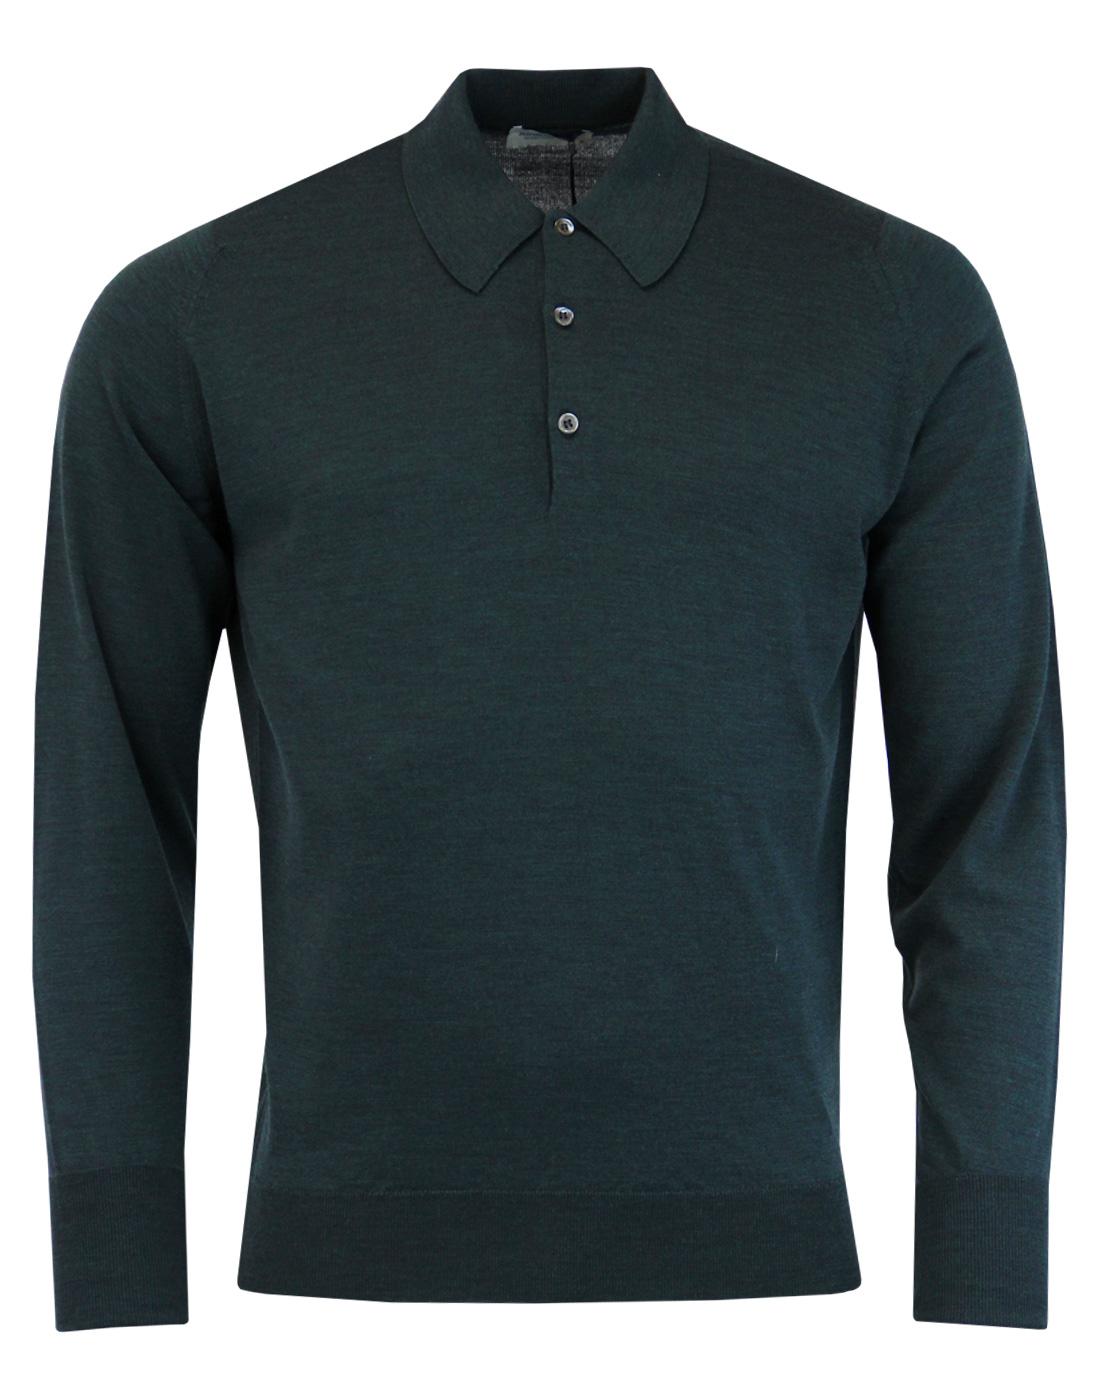 JOHN SMEDLEY Dorset Mod Made in England Knitted Polo Racing Green